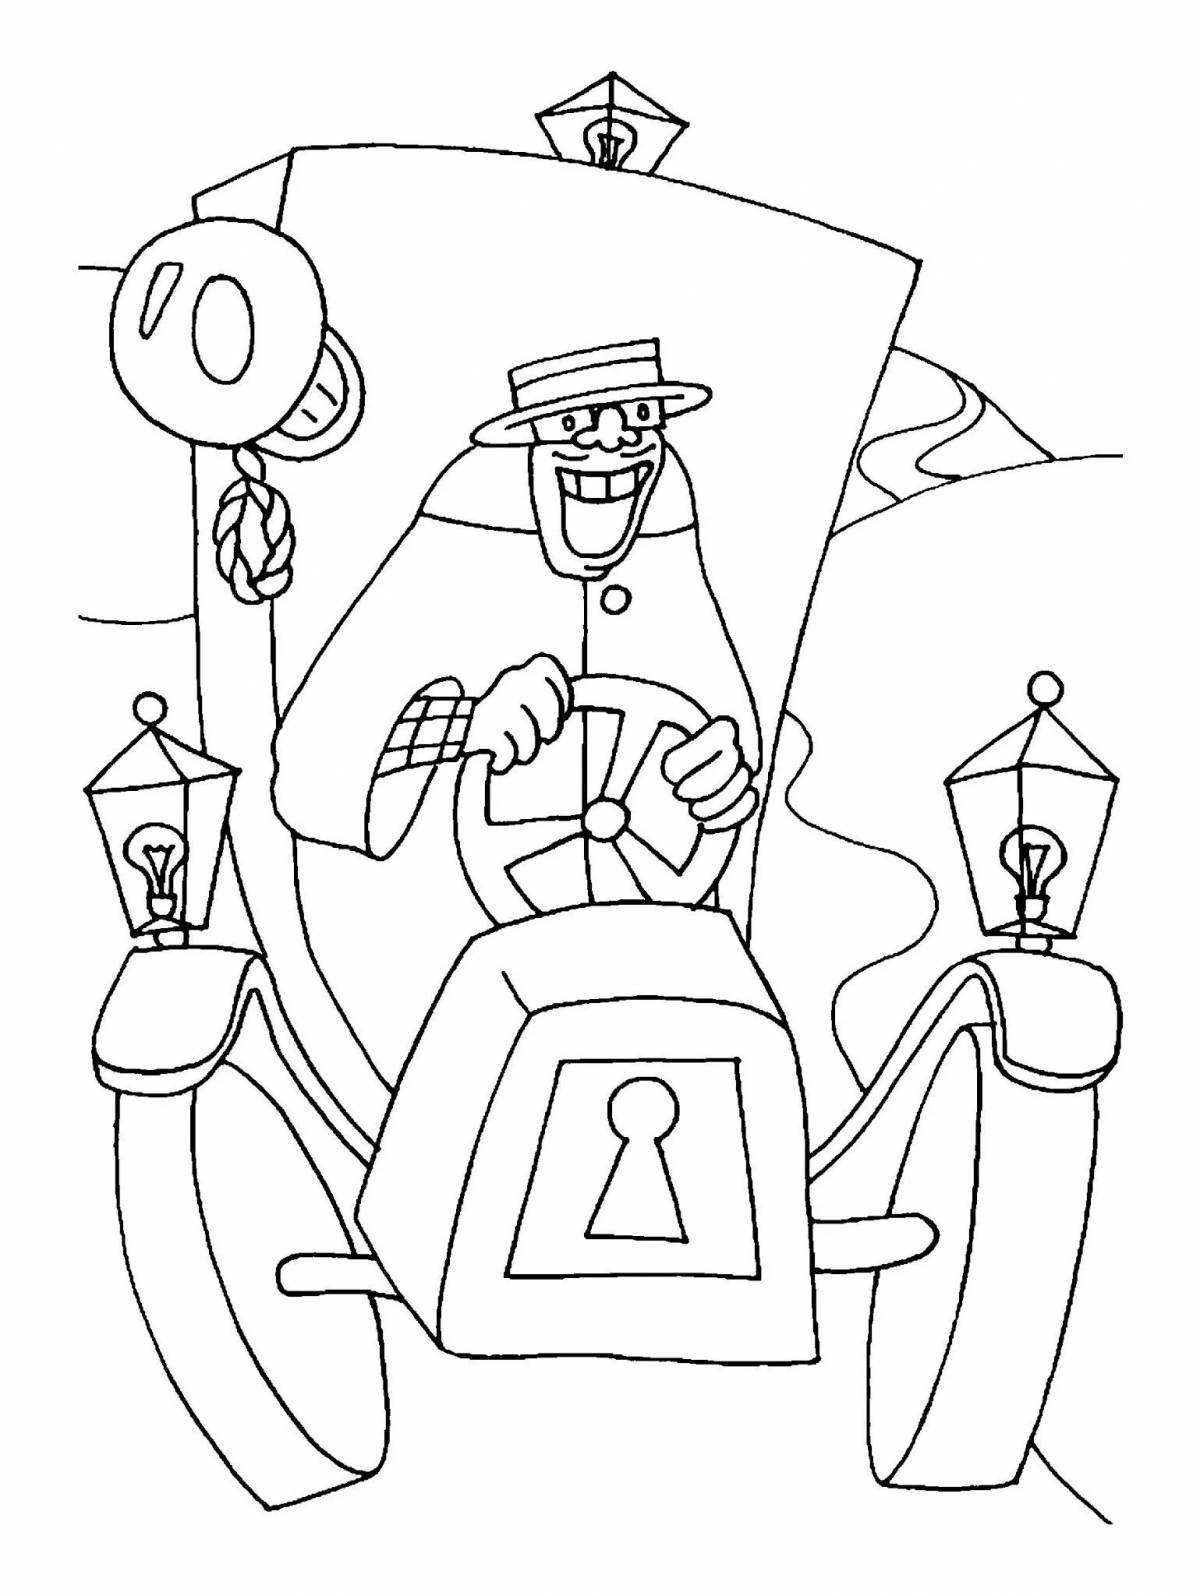 Quirky detective coloring book